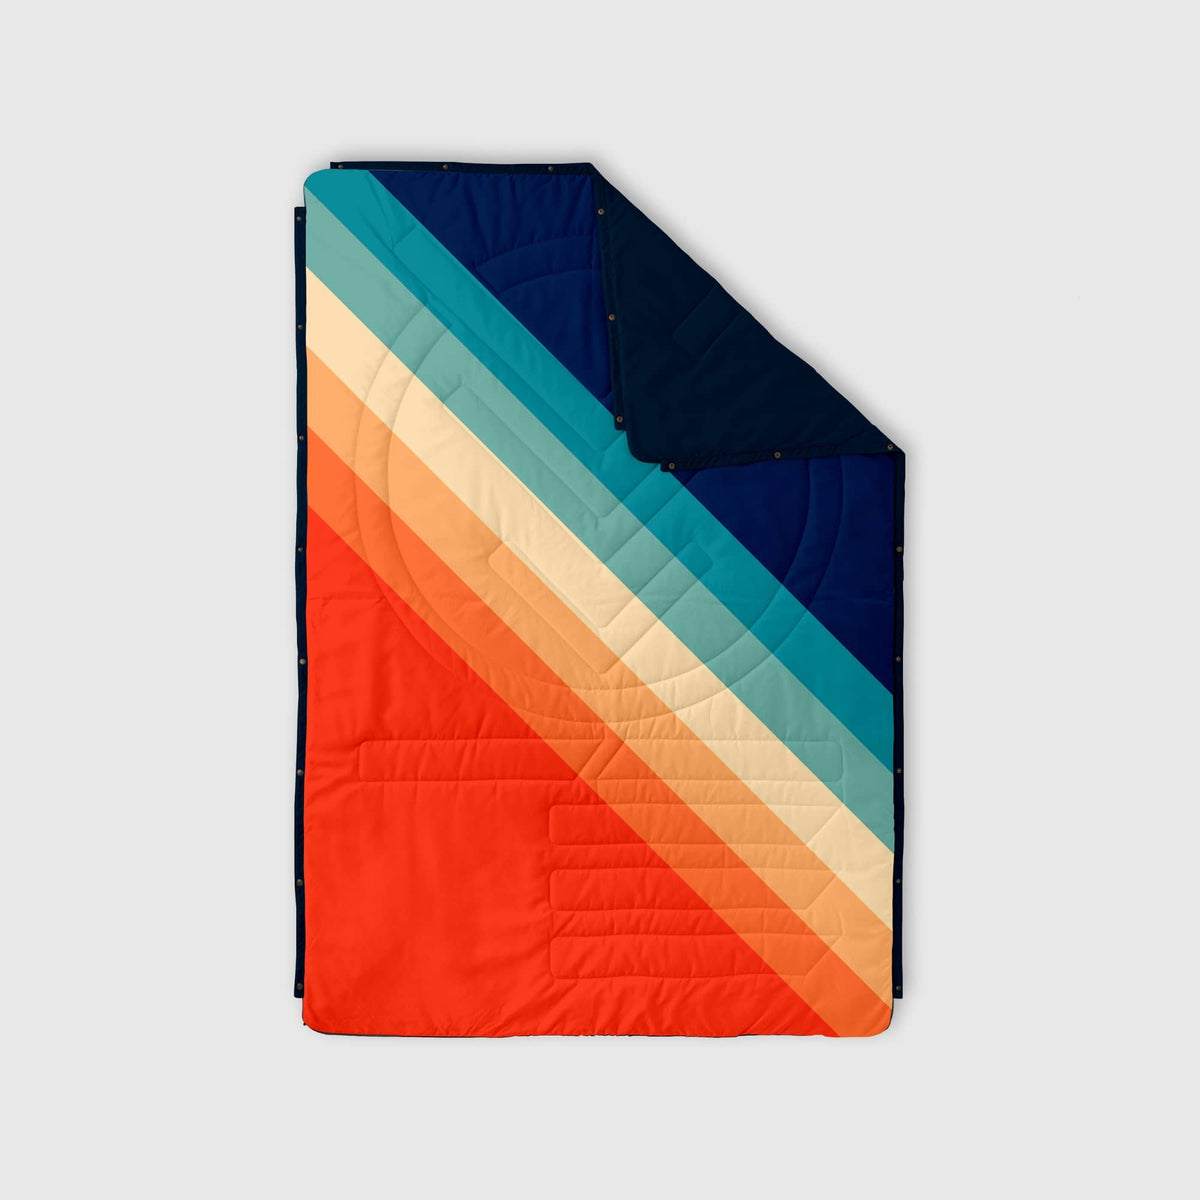 VOITED Recycled Ripstop Outdoor Camping Blanket - Rainbow Blankets VOITED 